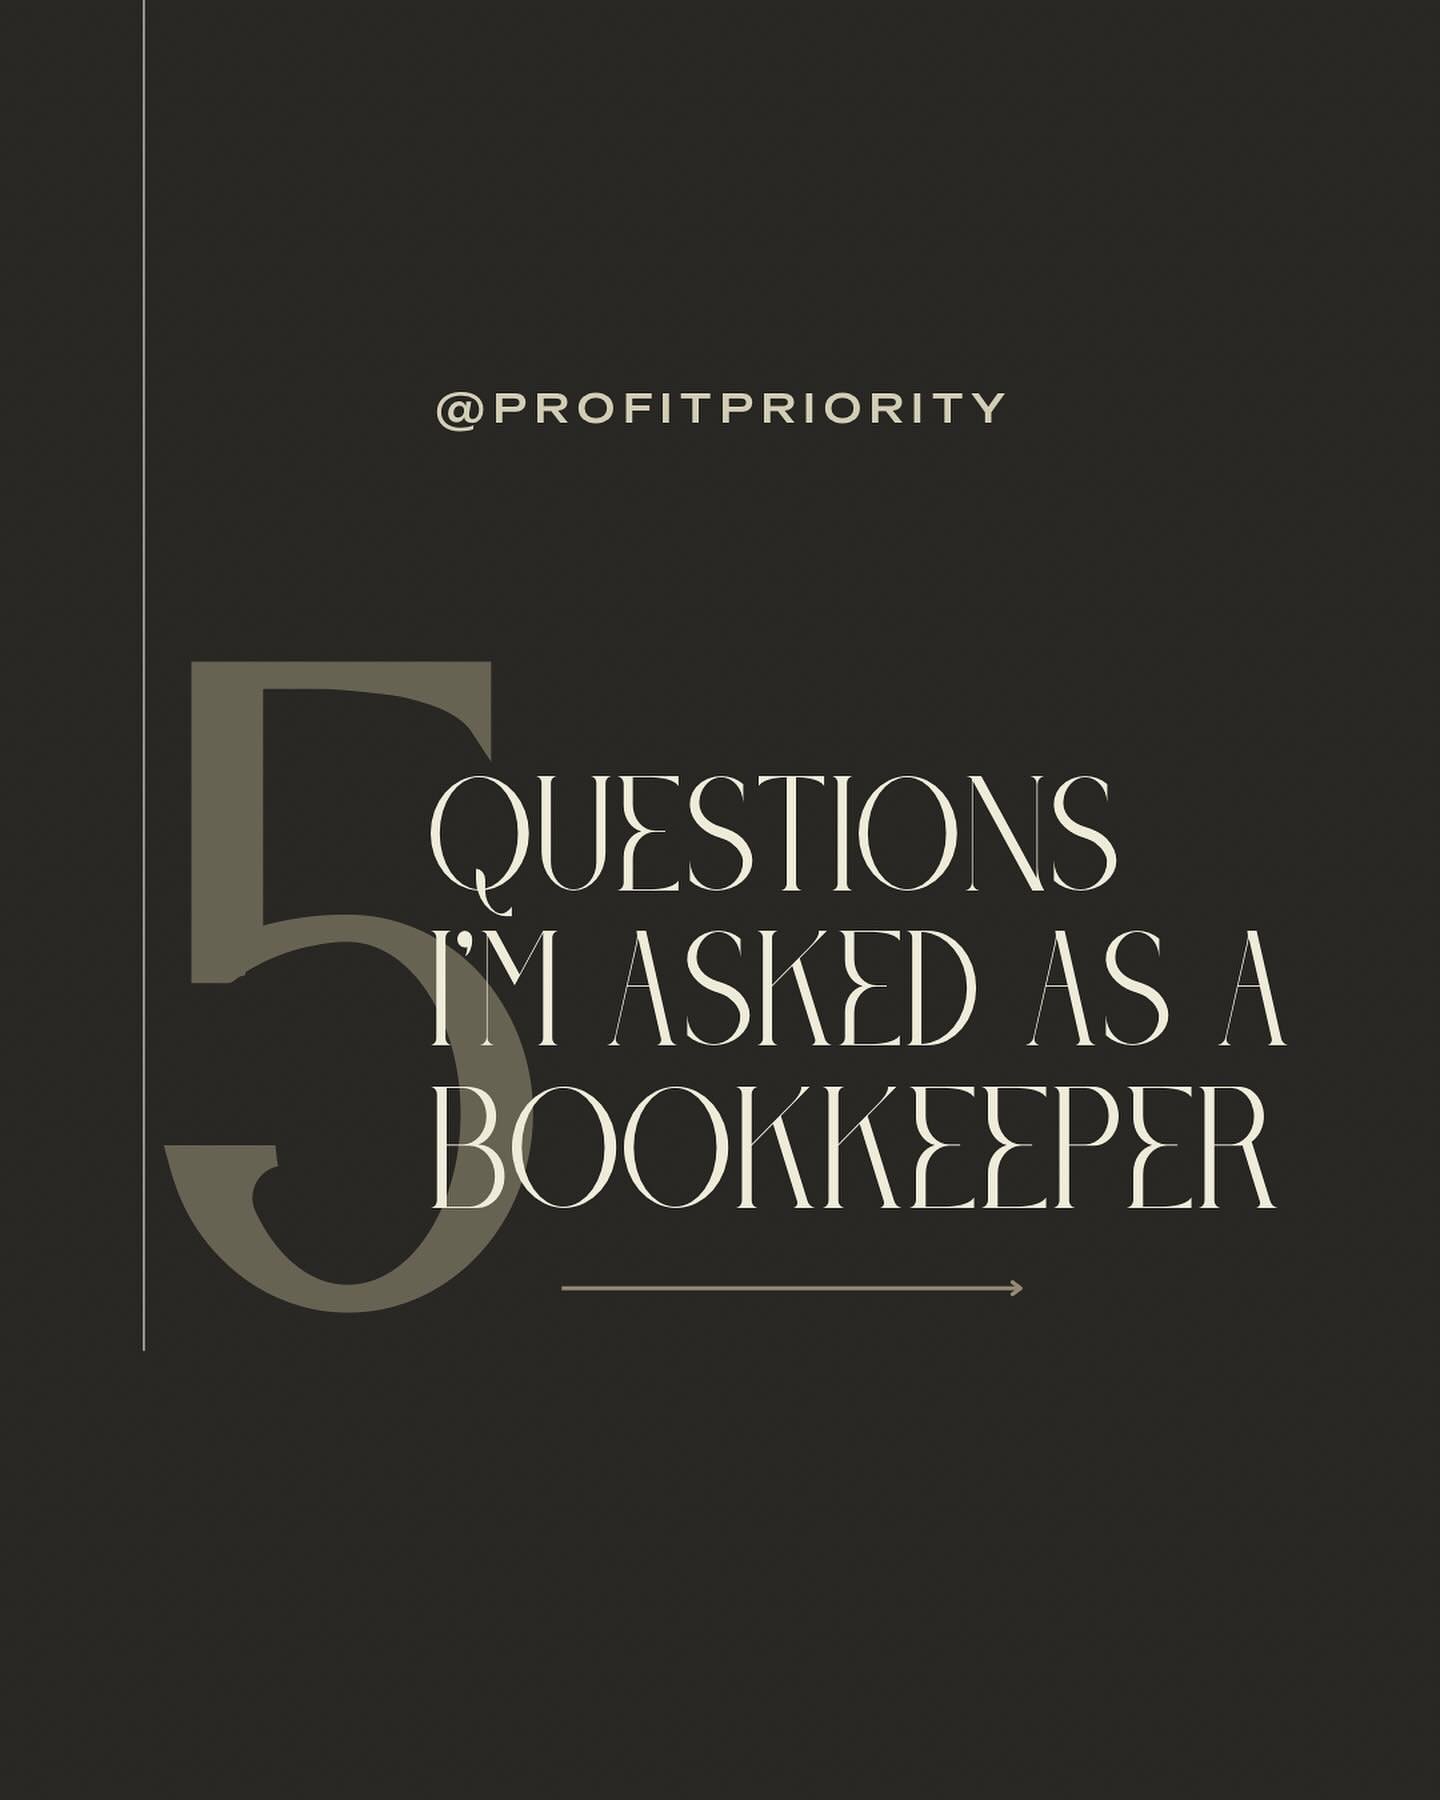 We get questions all the time, and here are the top 5 we&rsquo;re asked as bookkeepers.

Have you wondered any of these before? Hopefully these answers help!

And if you have a question not in this list, let us know in the comments 👇🏽

#financeques